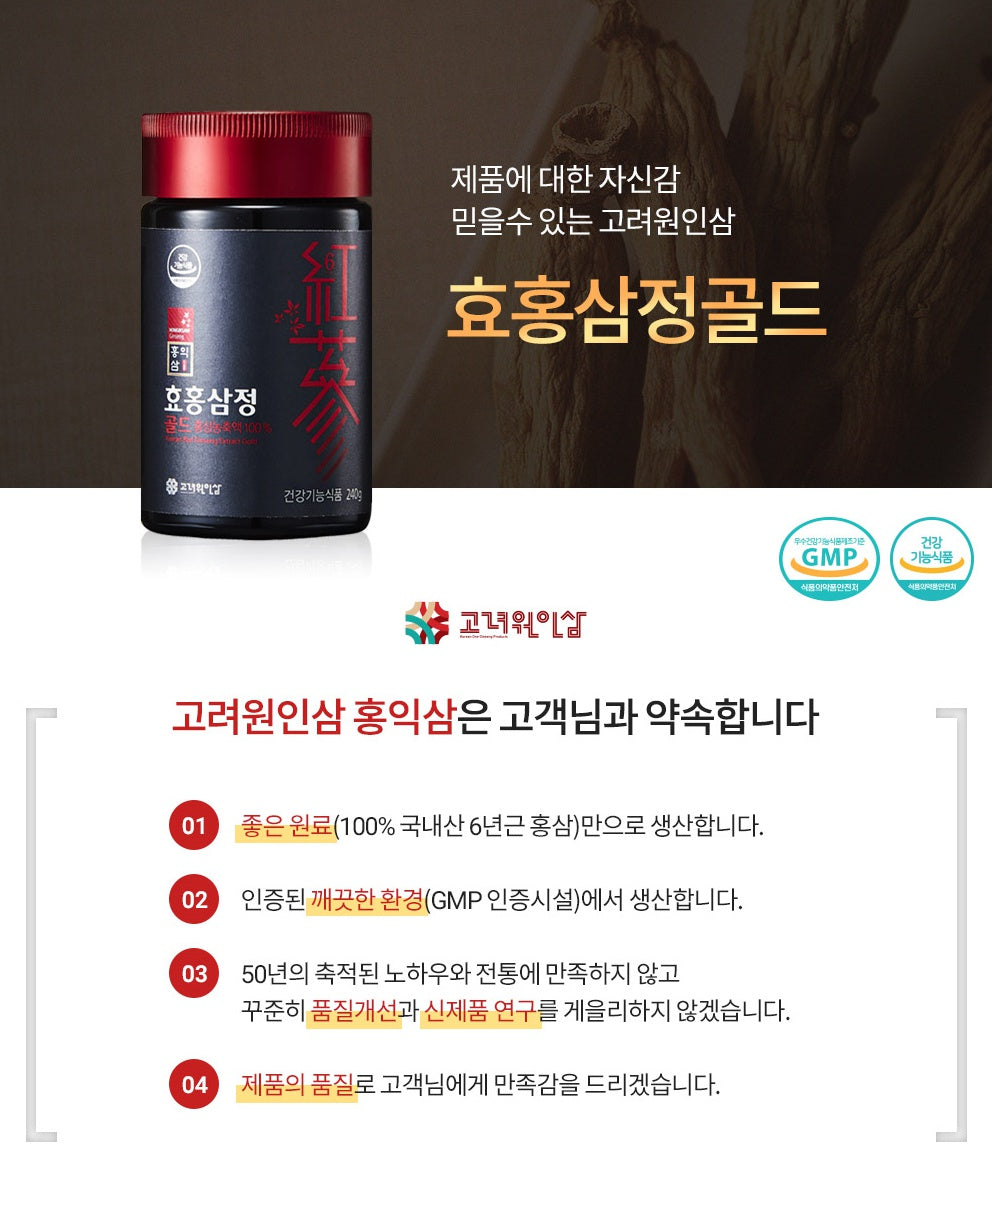 Korean Hyo Red Ginseng Extract Gold 100% Pure Premium Health Gifts